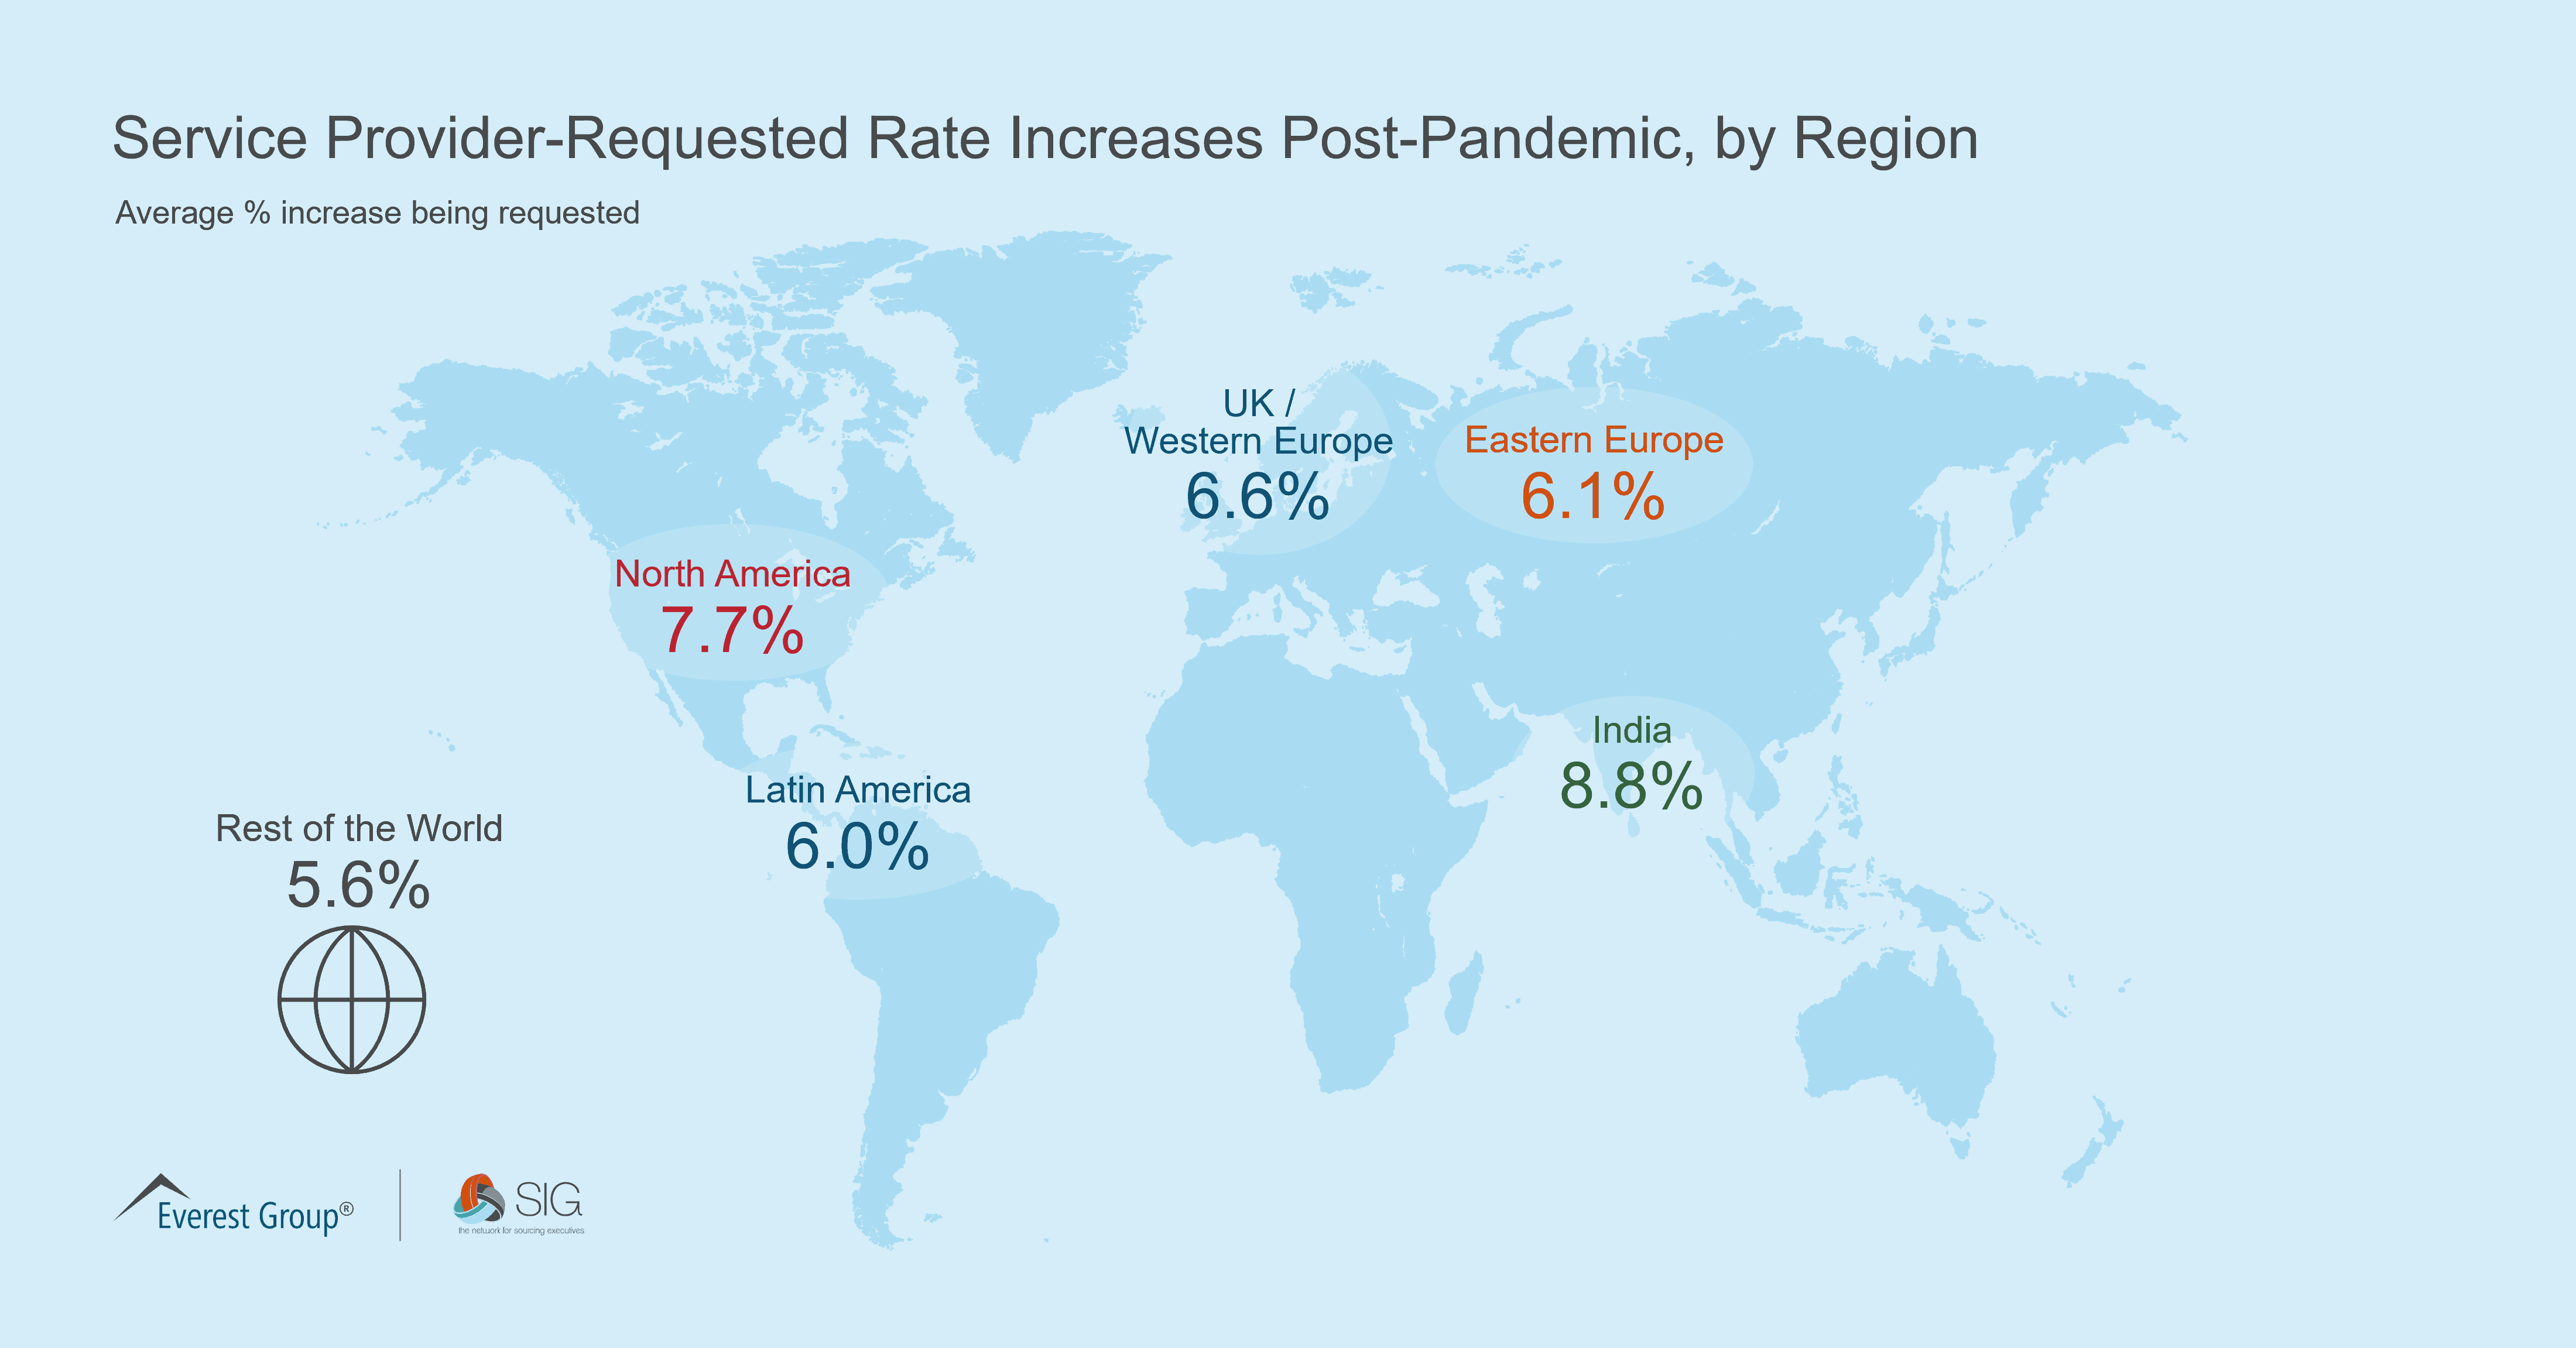 Service Provider-Requested Rate Increases Post-Pandemic, by Region